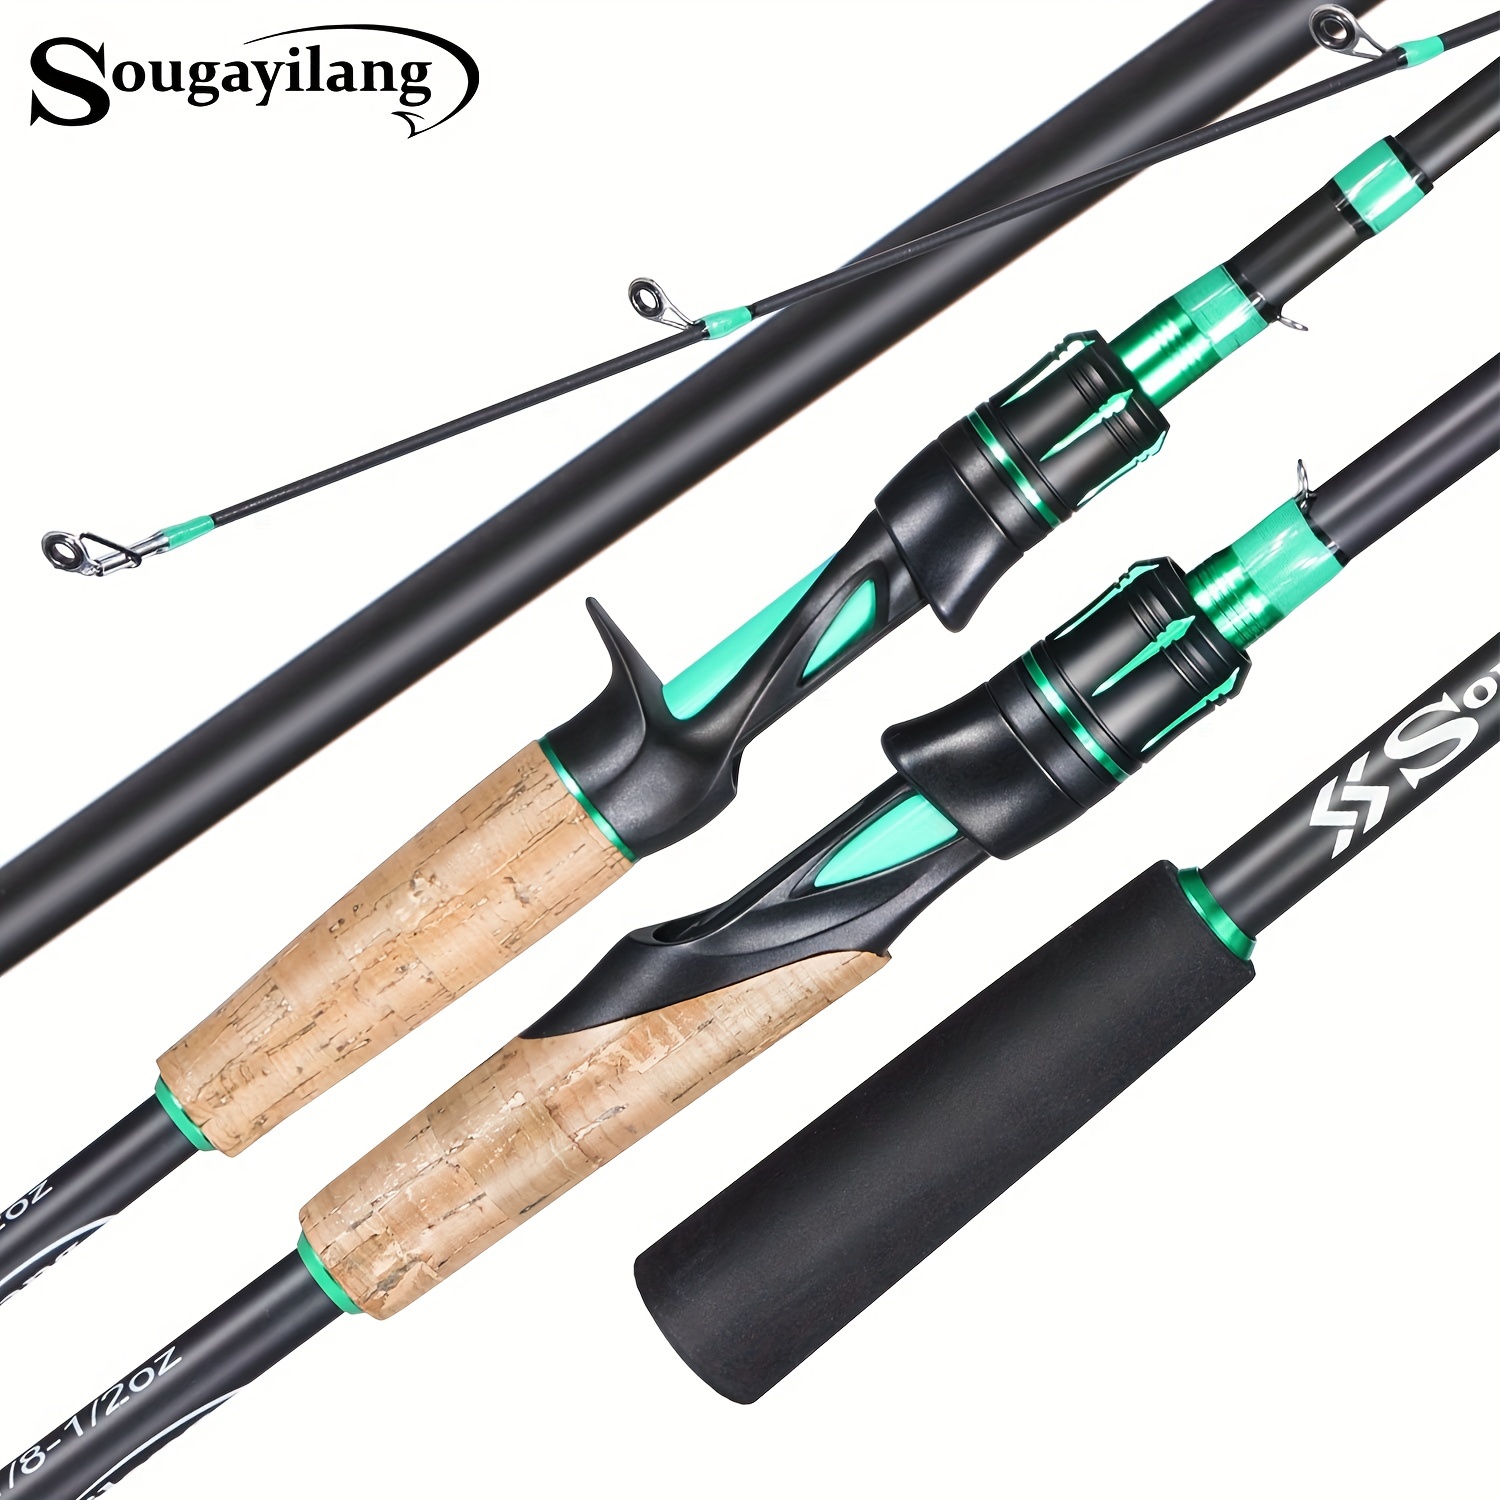 Sougayilang 1.8m 2.1m 0.8-5g Lure Weight Fishing Rods Lightweight Sensitive  Trout Rods Crappie Rod Spinning Casting Fishing Rod